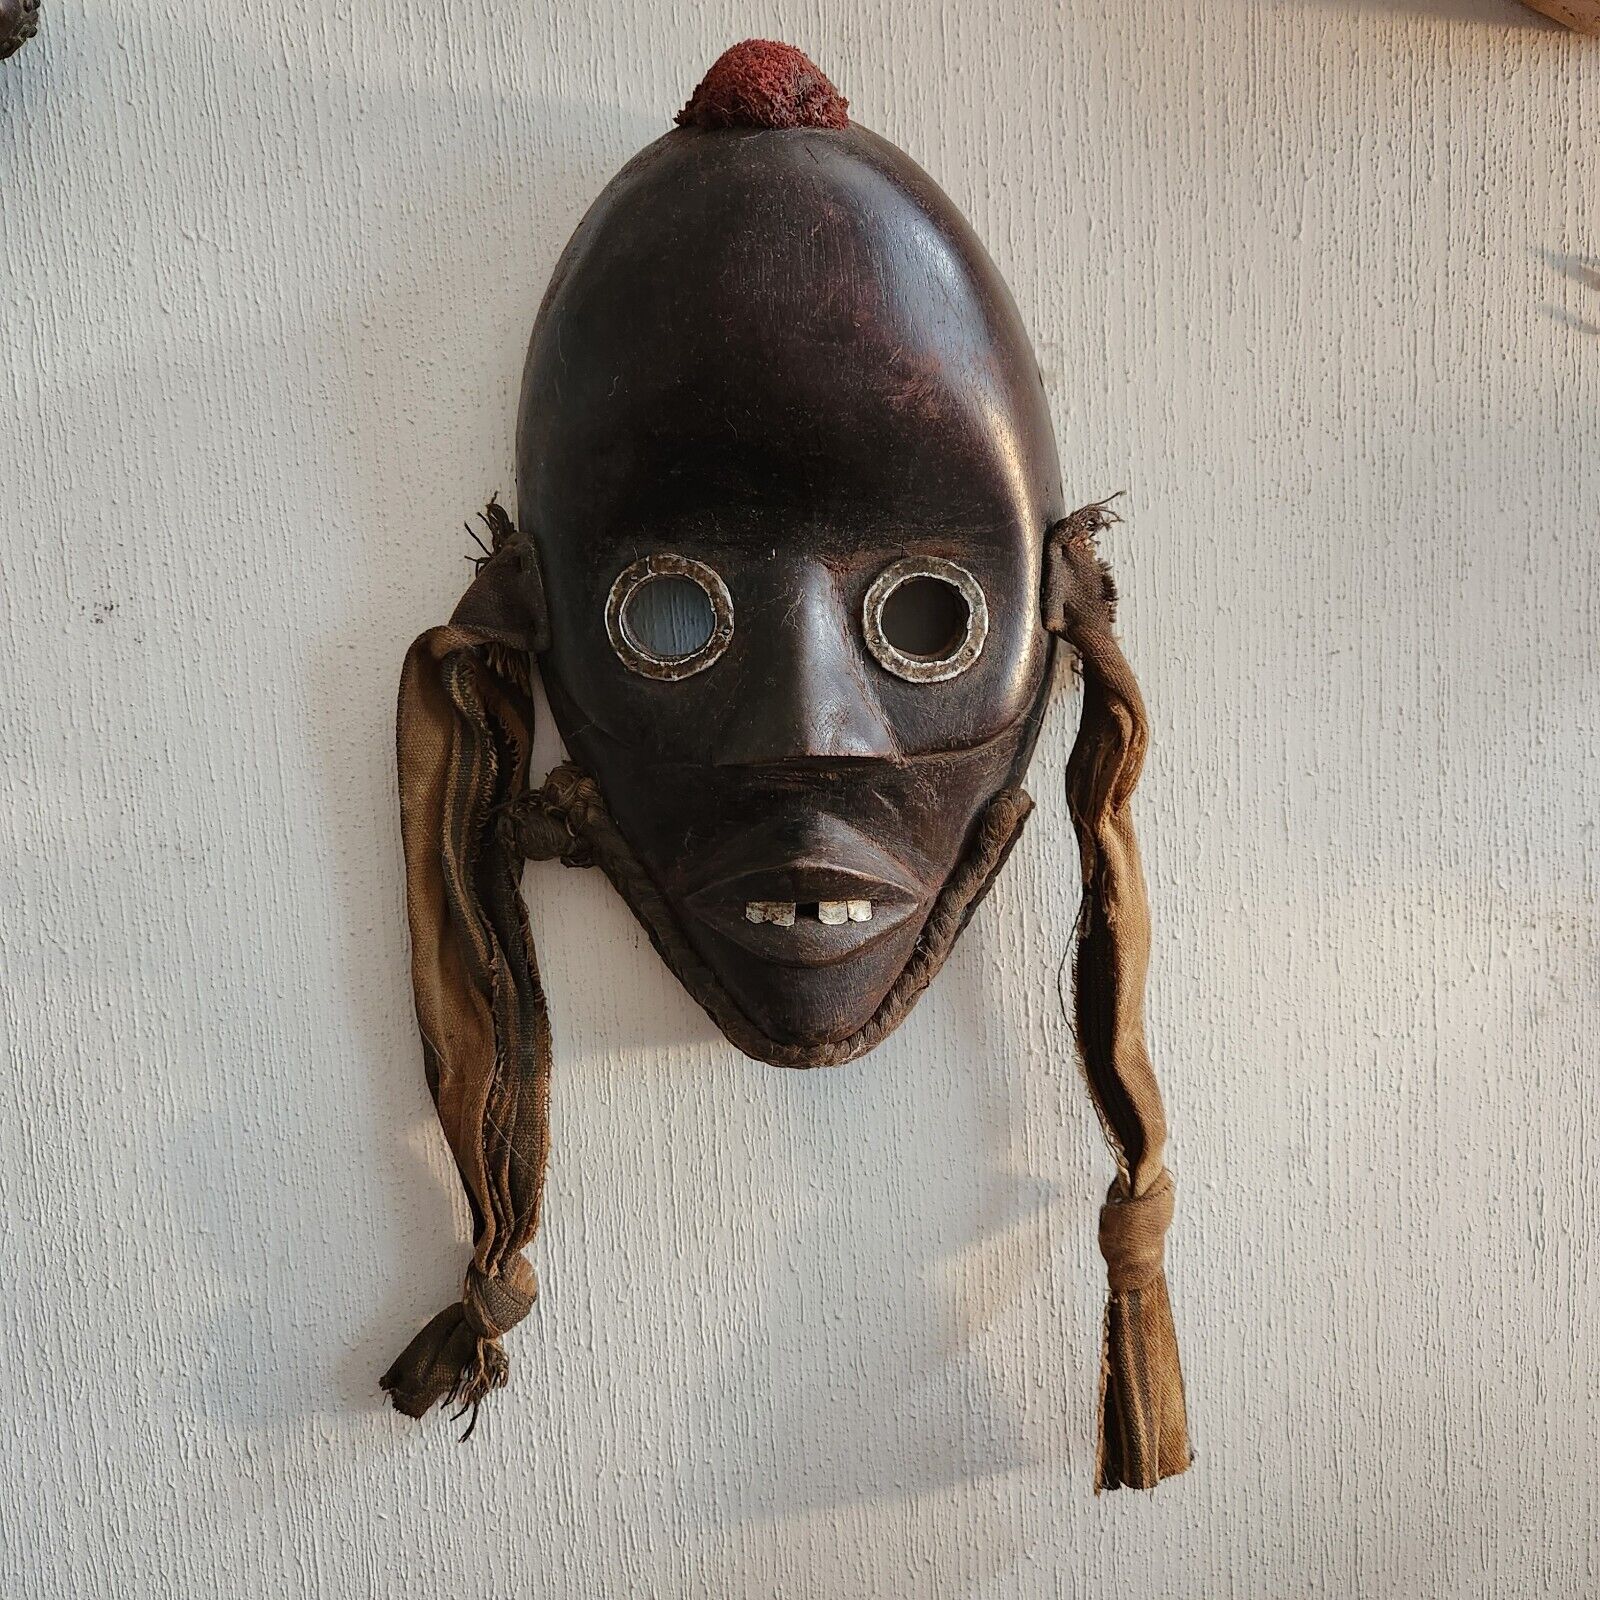 Very old, but well preserved Dan Rasta mask from Ivory Coast.